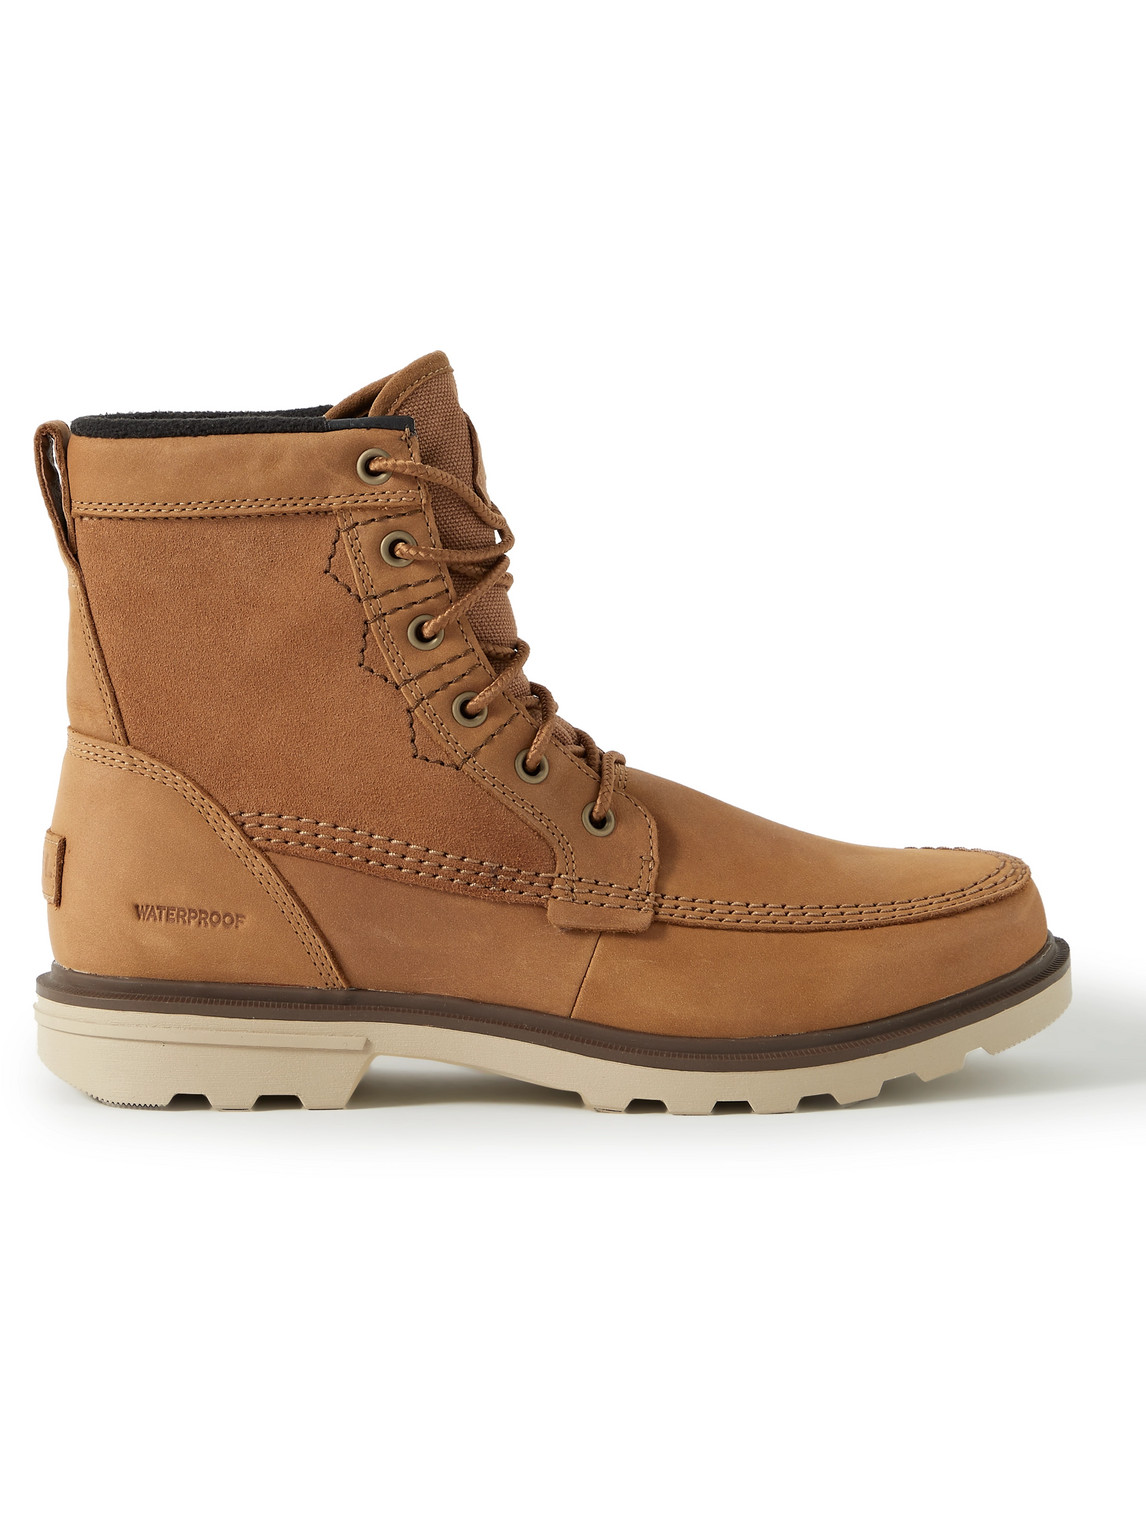 Carson™ Storm Fleece-Lined Leather, Canvas and Suede Boots